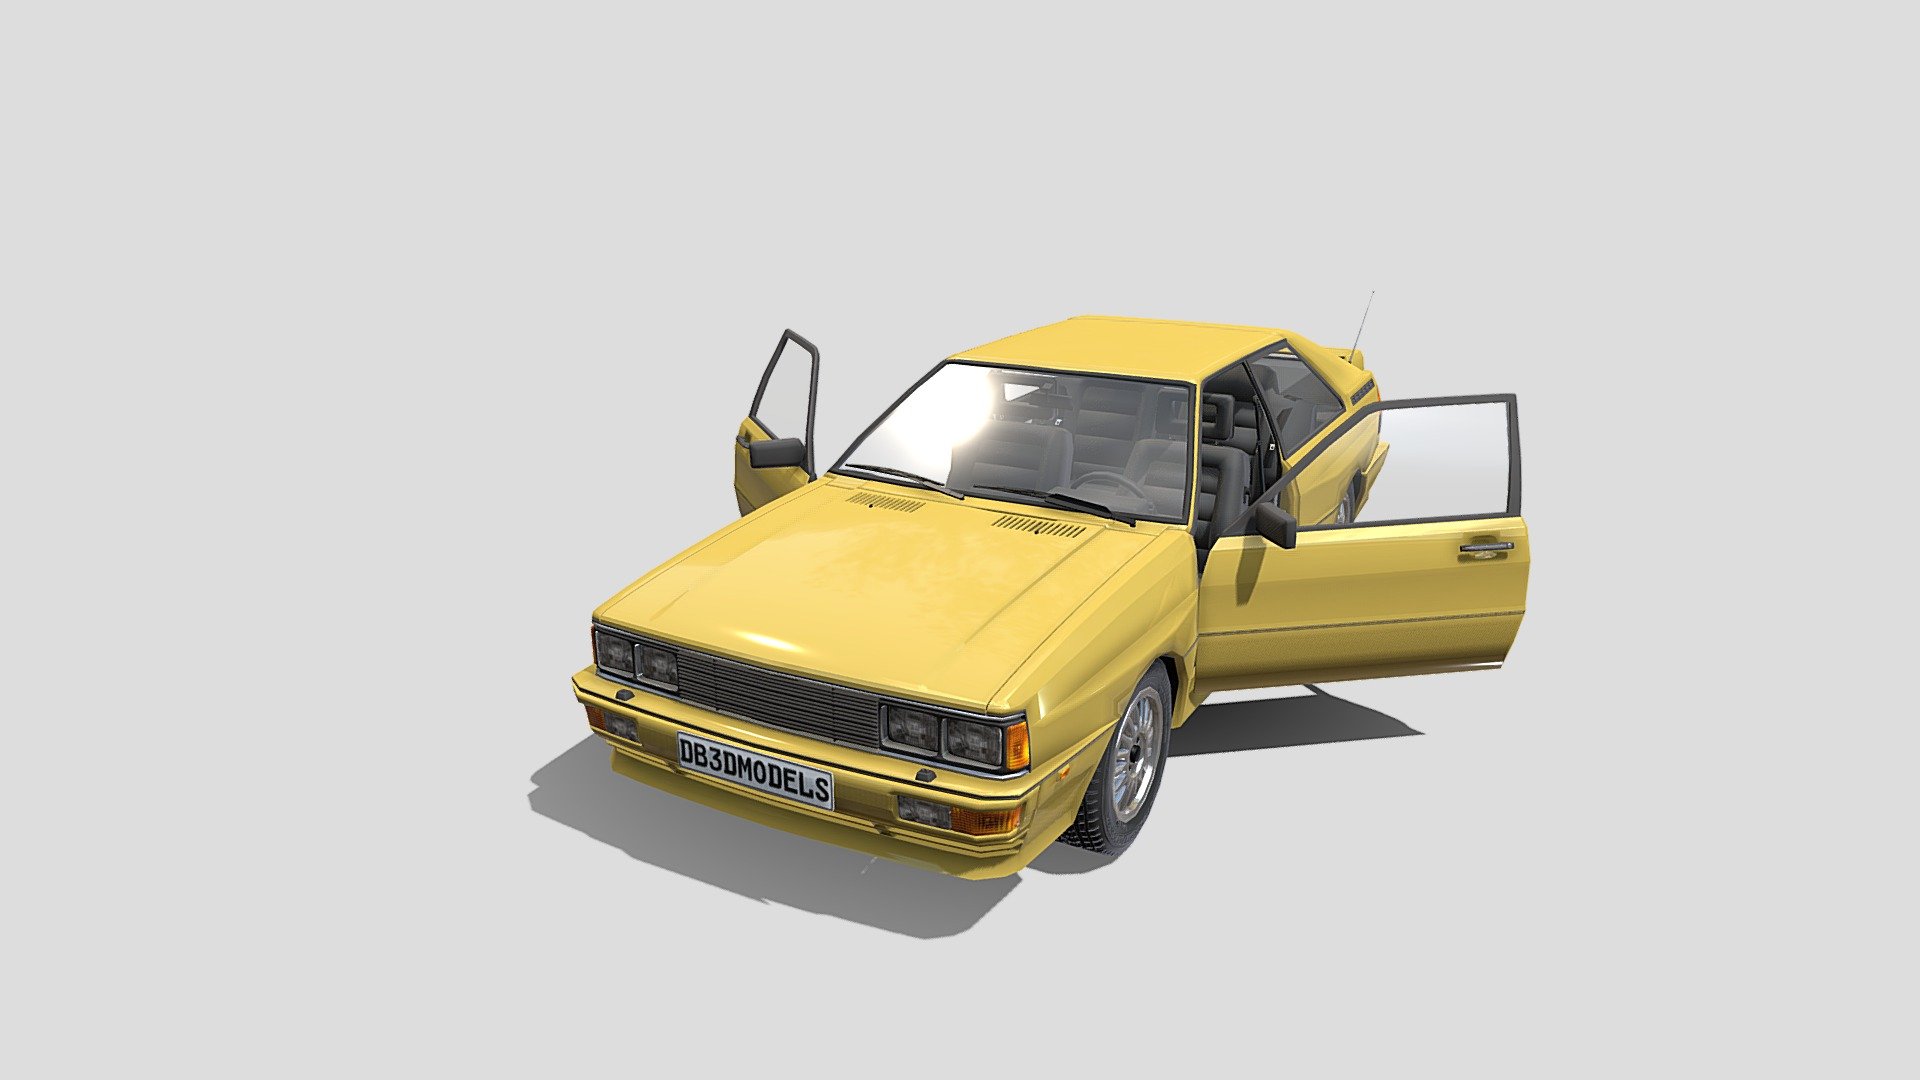 Highly detailed Generic 80s Coupe with interior 3d model rendered with Cycles in Blender, as per seen on attached images. 
The 3d model is scaled to original size in Blender.

File formats:
-.blend, rendered with cycles, as seen in the images;
-.blend, open, rendered with cycles, as seen in the images;
-.obj, with materials applied;
-.obj, open, with materials applied;
-.dae, with materials applied;
-.dae, open, with materials applied;
-.fbx, with materials applied;
-.fbx, open, with materials applied;
-.stl;
-.stl, open;

Files come named appropriately and split by file format.

3D Software:
The 3D model was originally created in Blender 2.8 and rendered with Cycles.

Materials and textures:
The models have materials applied in all formats, and are ready to import and render.
The models come with four png textures(one for the number plate, which can easily be removed).

For any problems please feel free to contact me.

Don't forget to rate and enjoy! - Generic 80s Coupe with interior - Buy Royalty Free 3D model by dragosburian 3d model